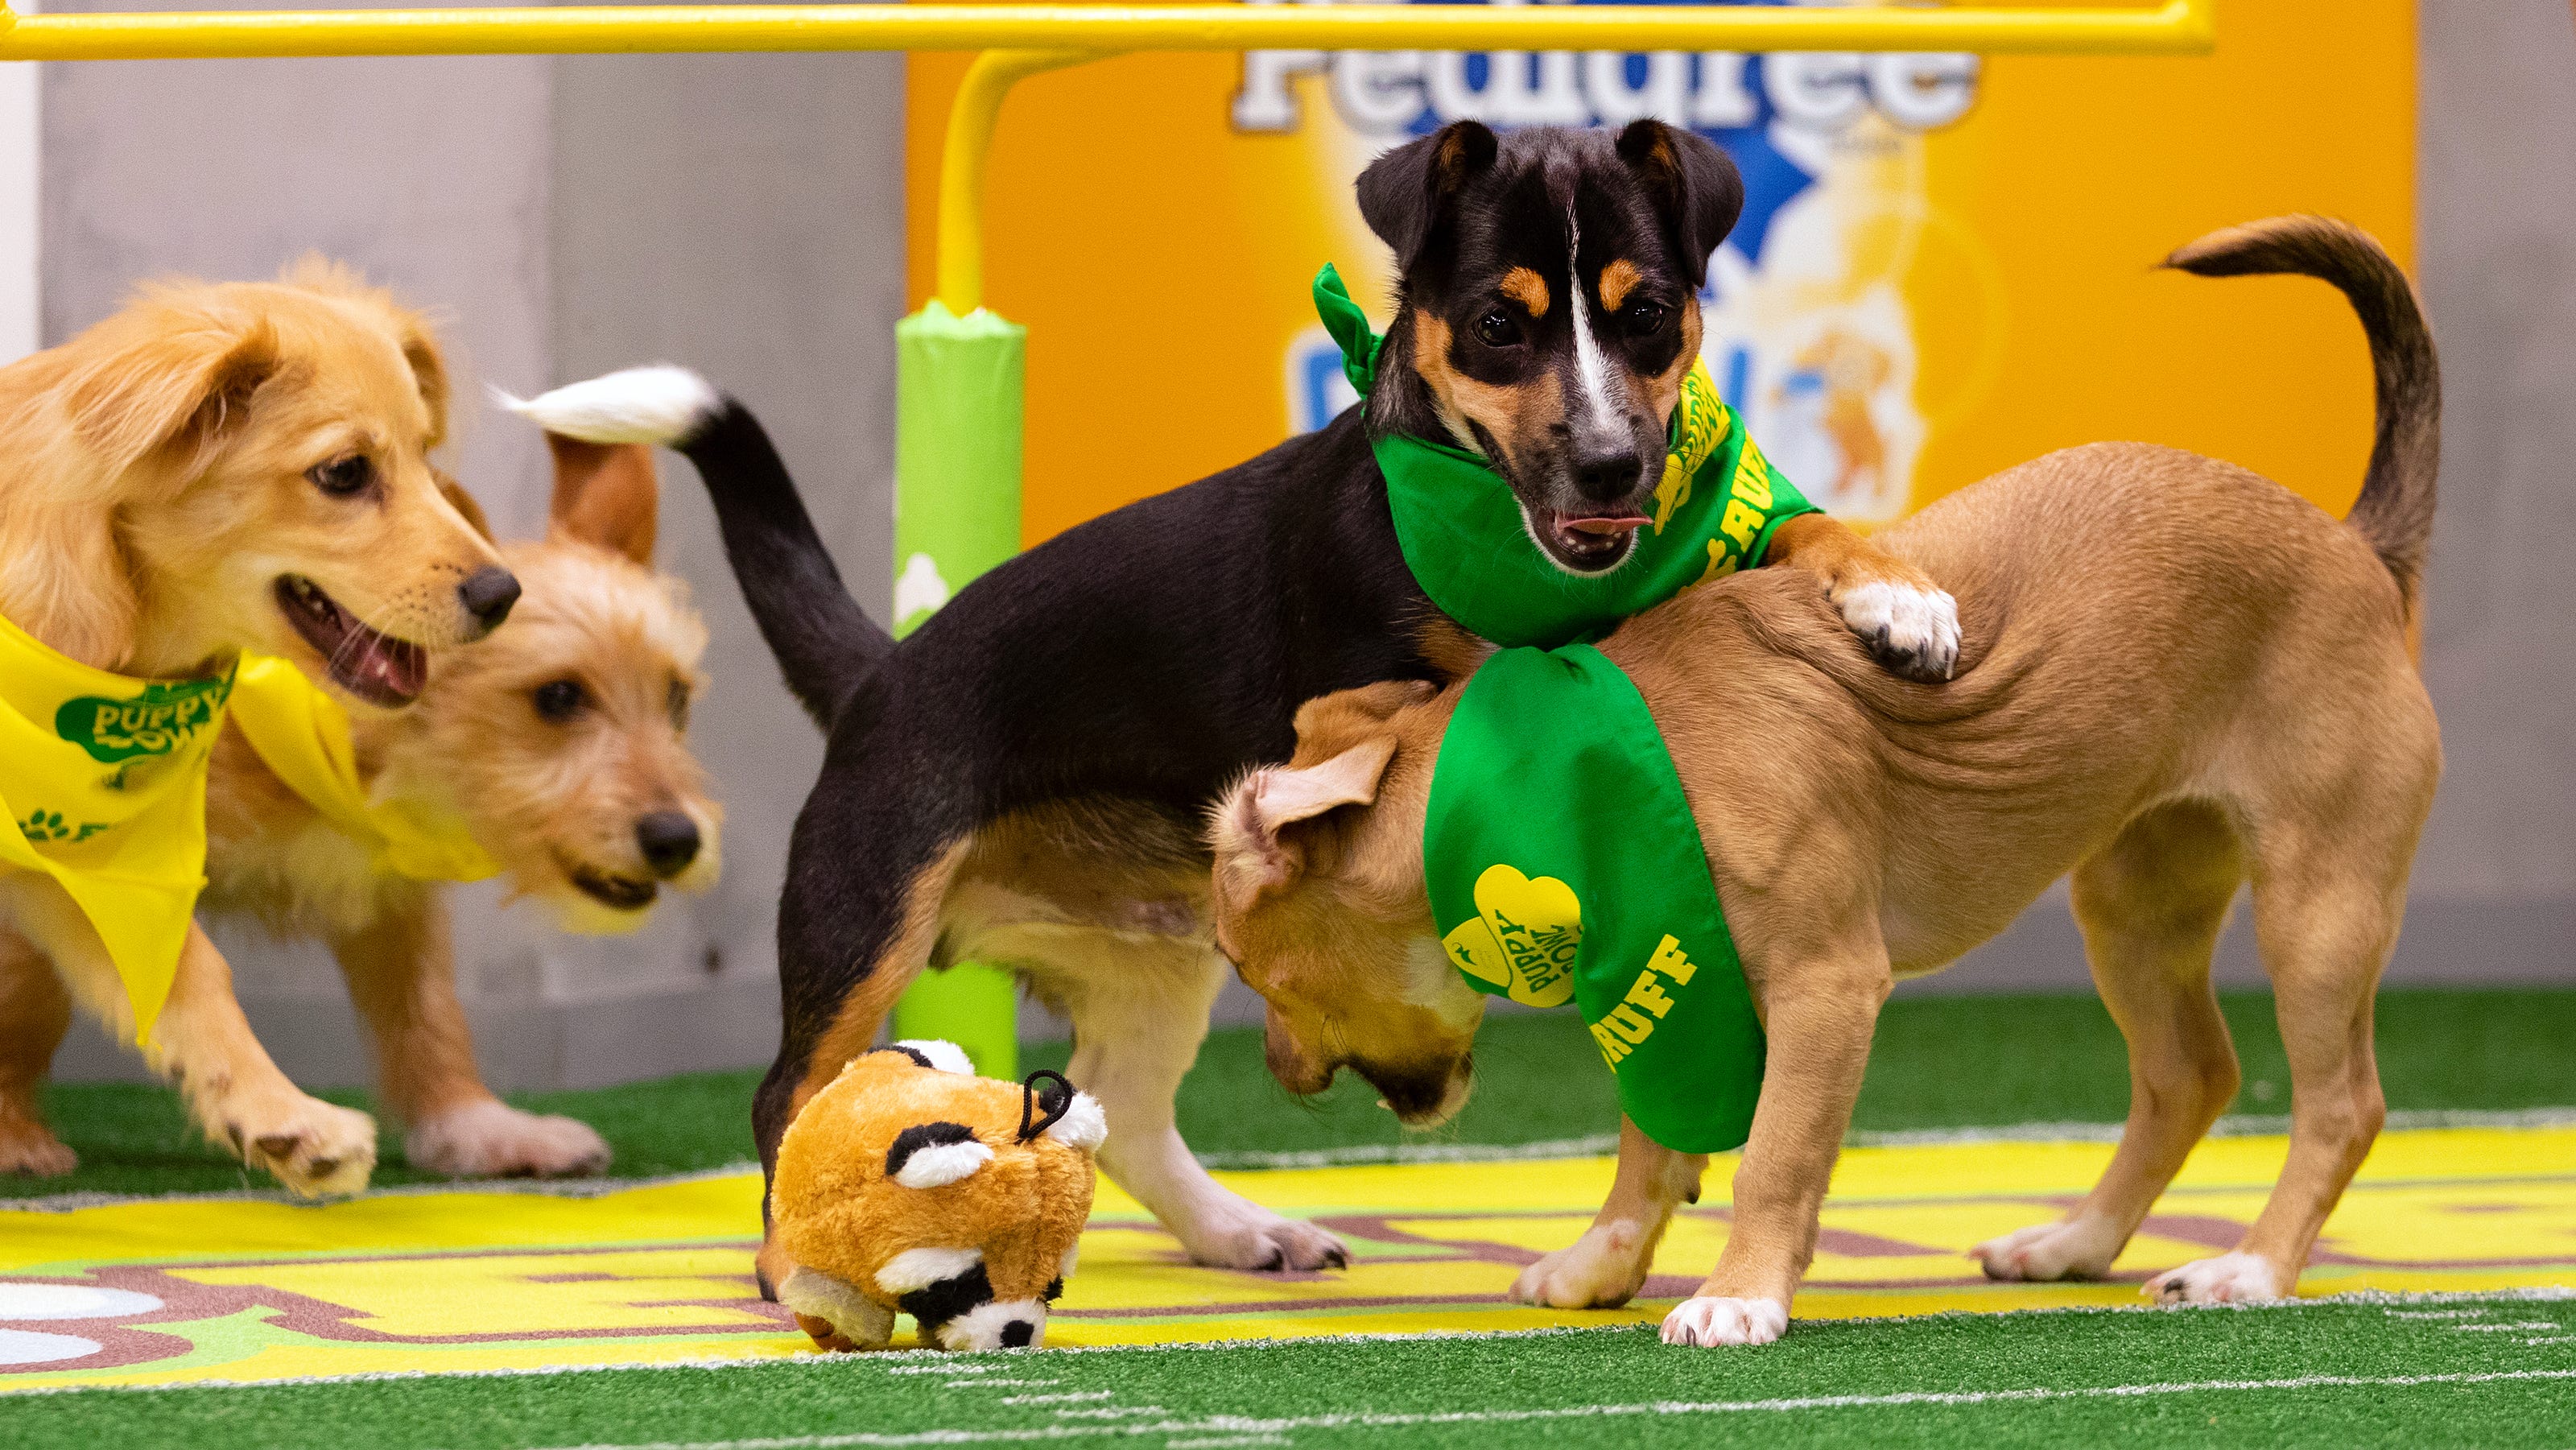 Puppy Bowl 2019 6 Nashville dogs to compete in Animal Super